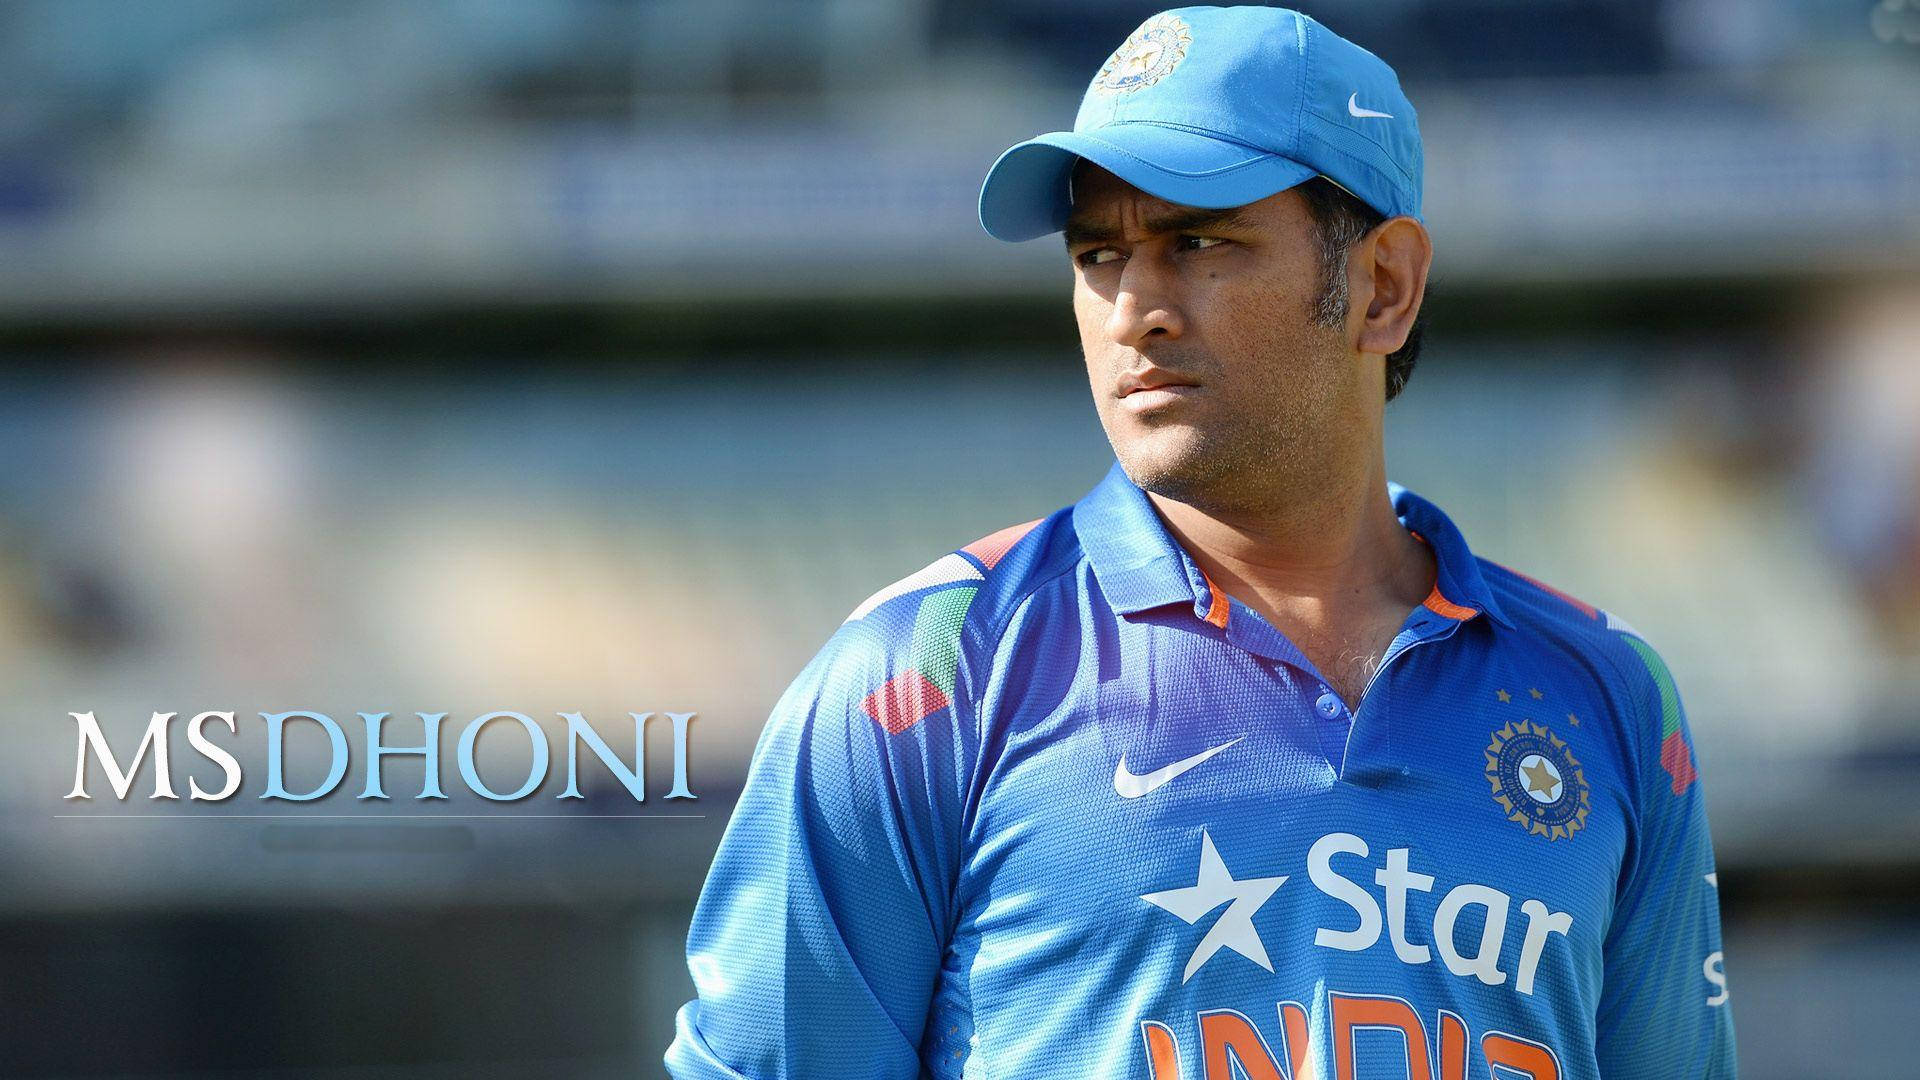 Ms Dhoni Star India Cricket Team Background